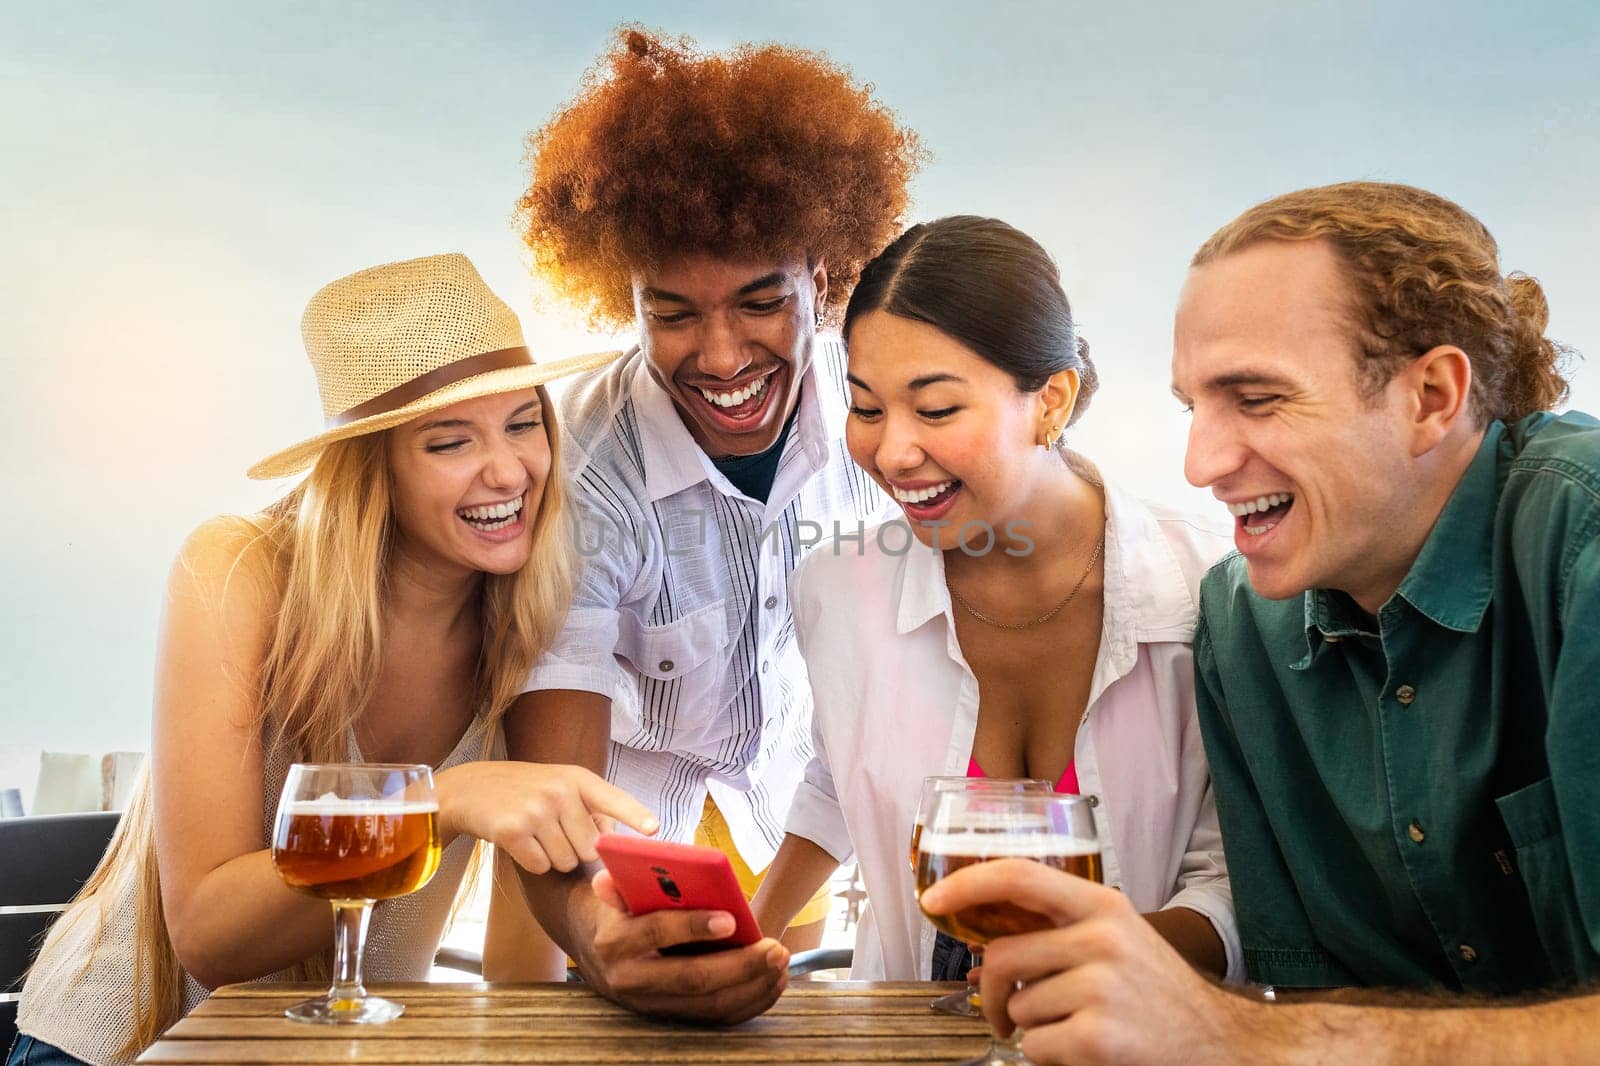 Young African American man and his happy multiracial friends looking at mobile phone in a beach bar while drinking beer. by Hoverstock